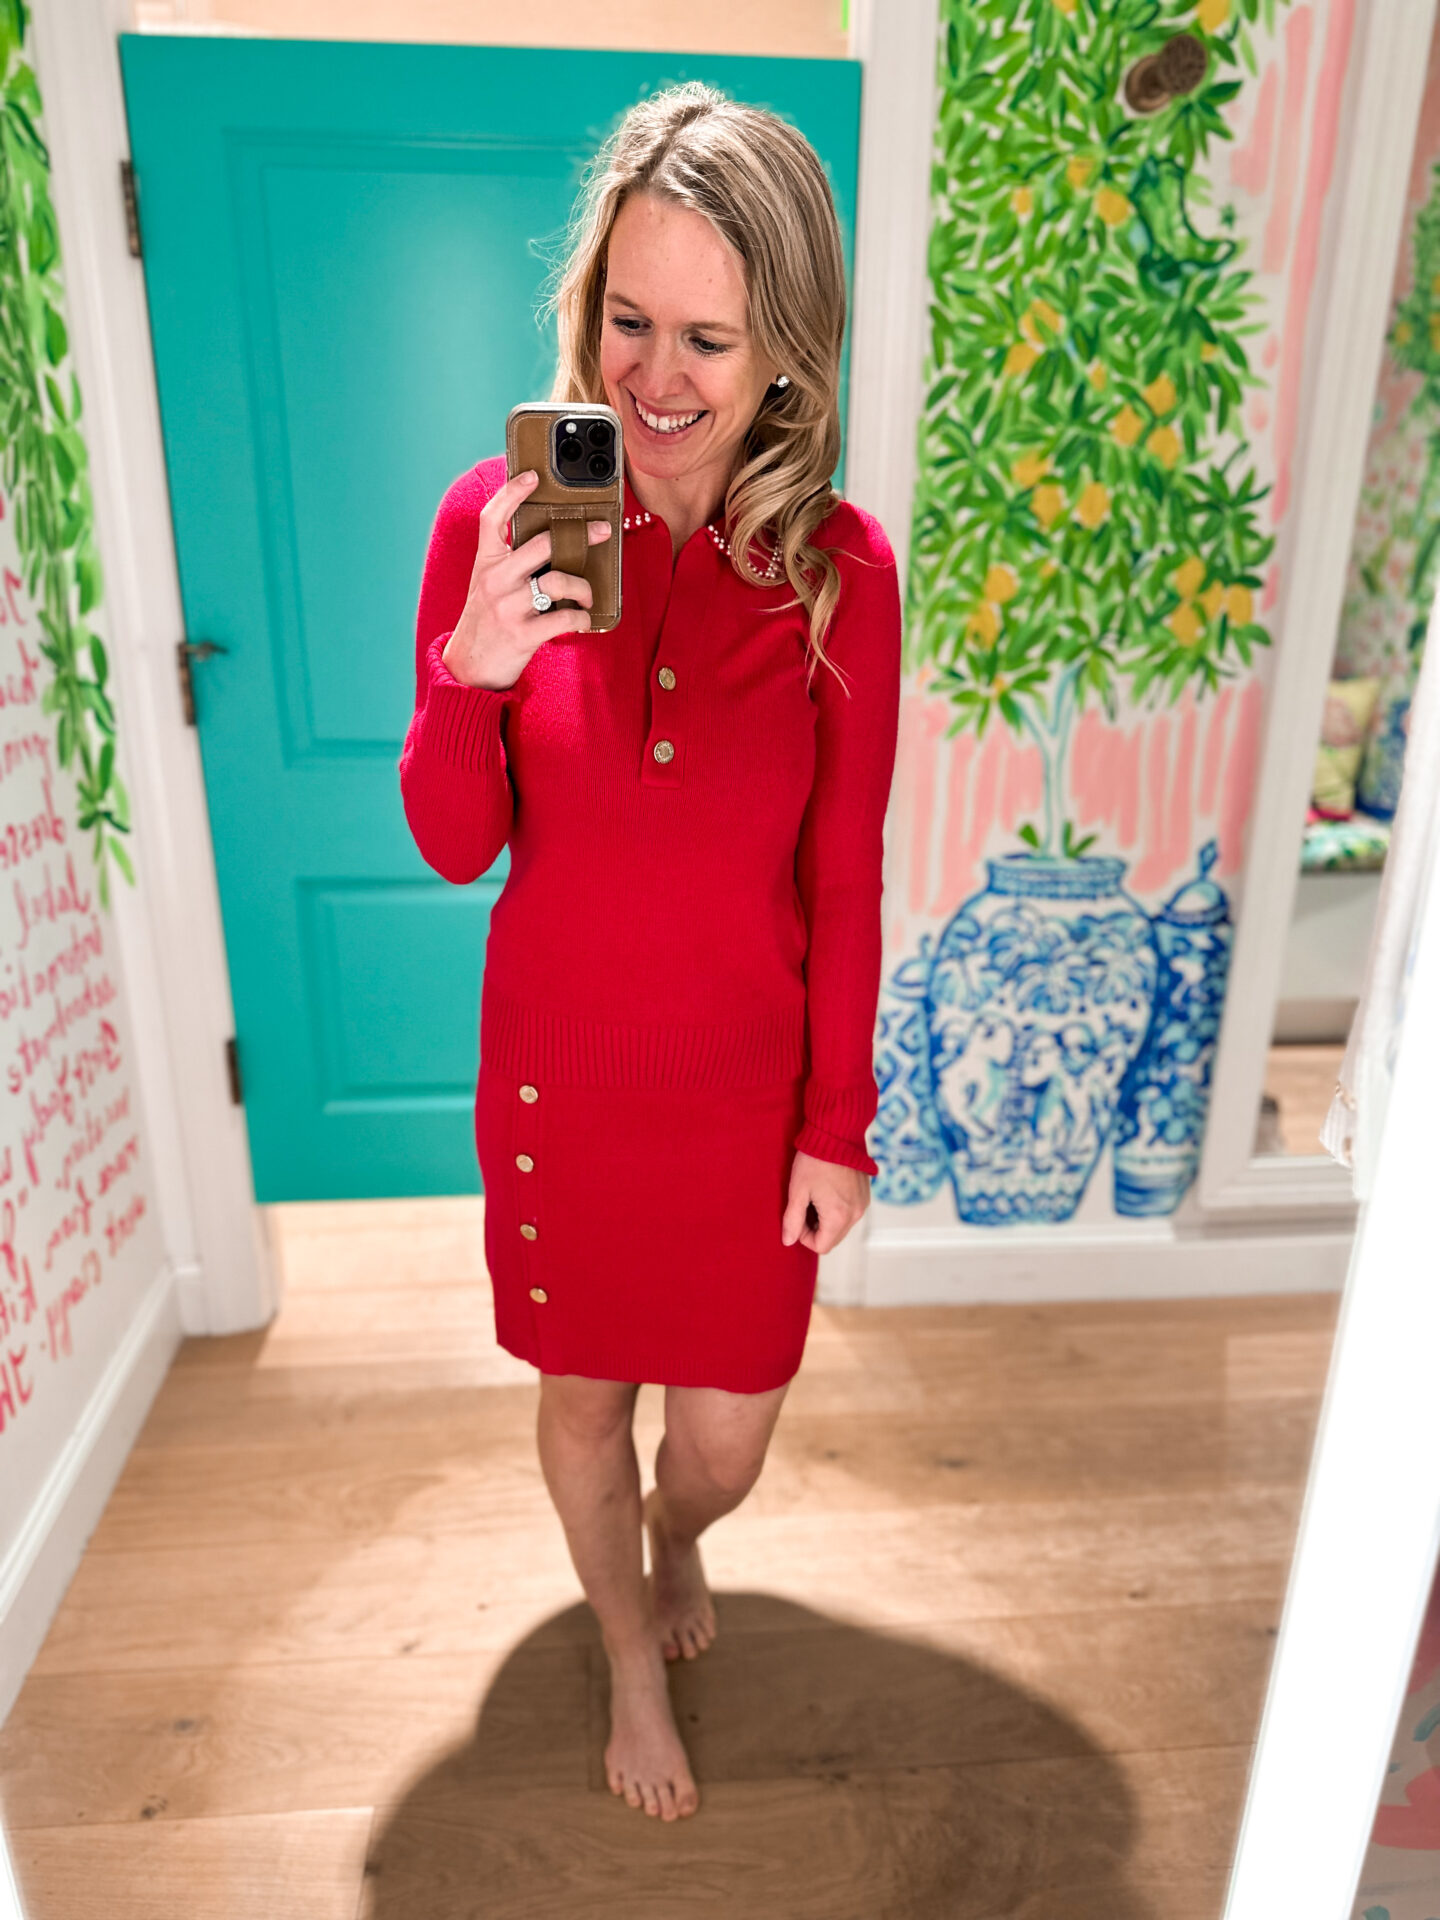 Lilly Pulitzer Sale | Lilly Pulitzer After Party Sale Details | Red sweater dress from Lilly